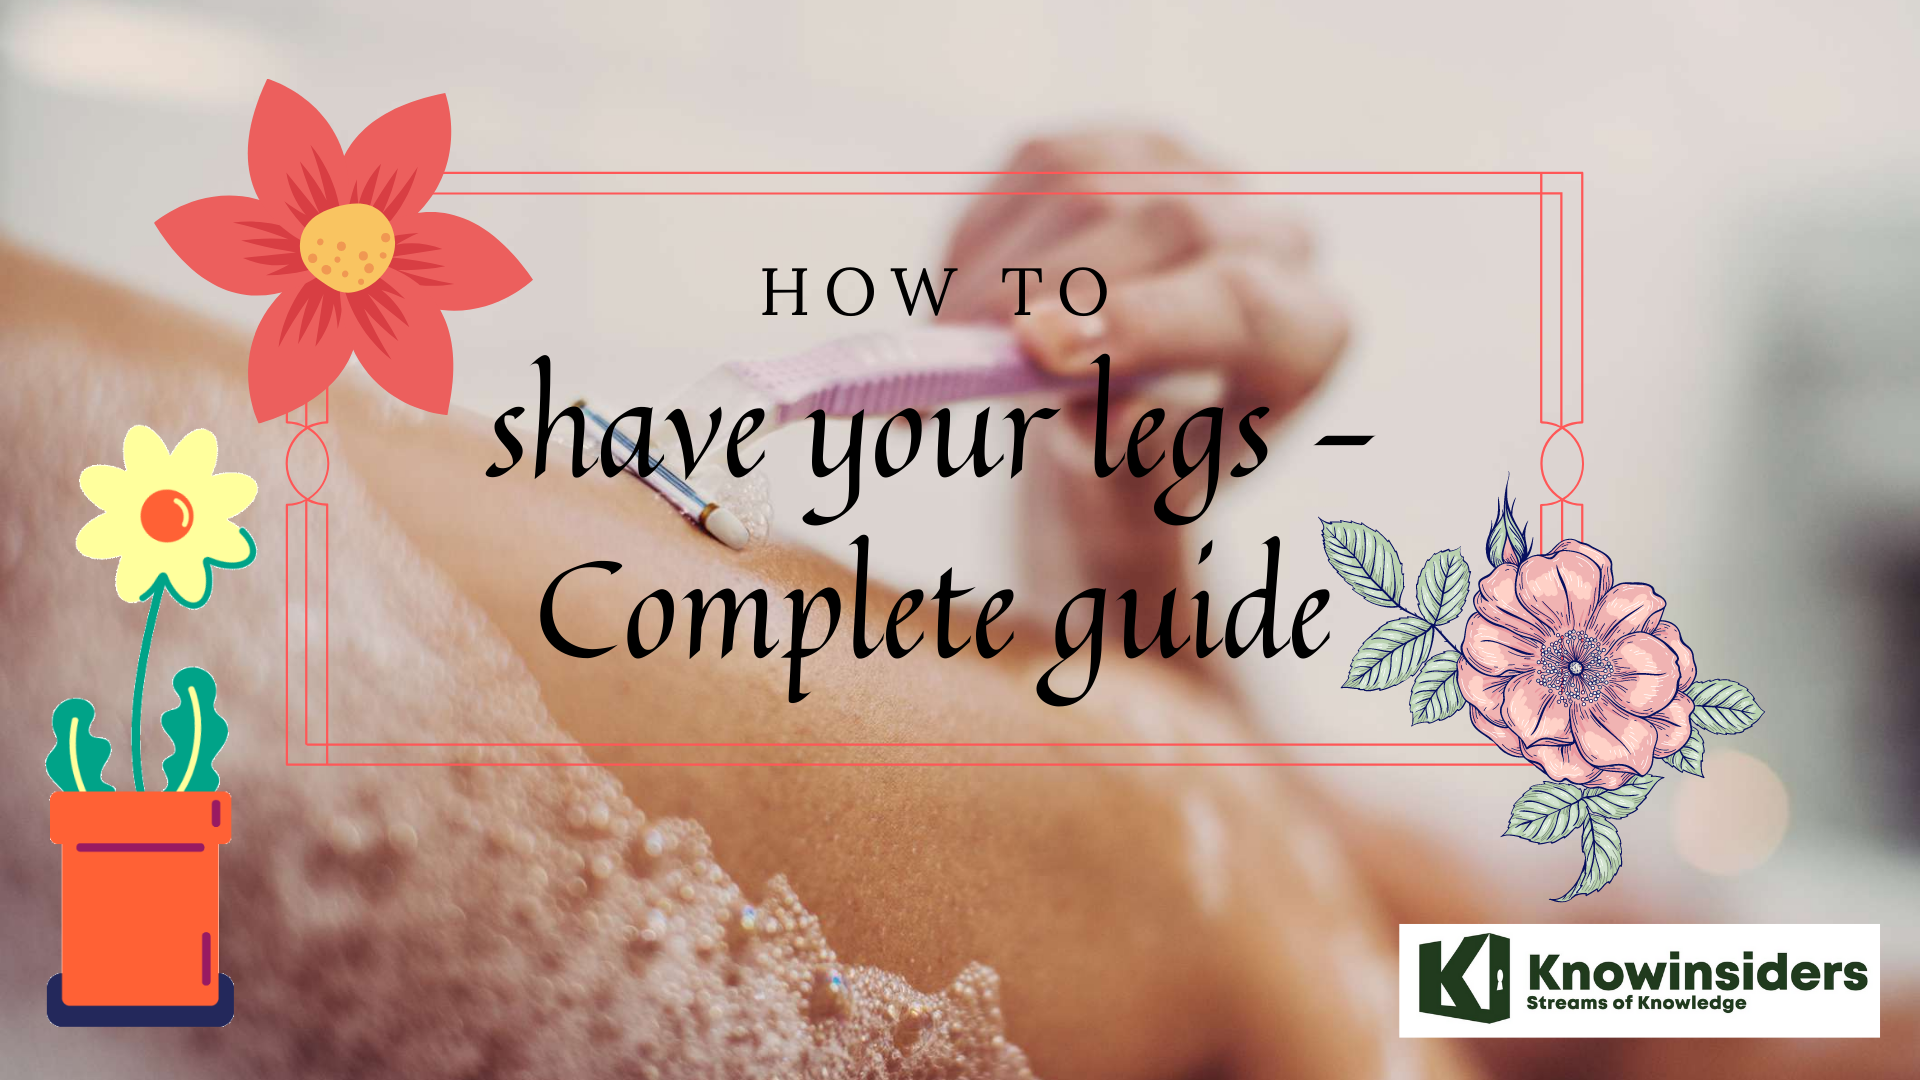 How To Shave Your Legs: Guide with 9 Simple Steps